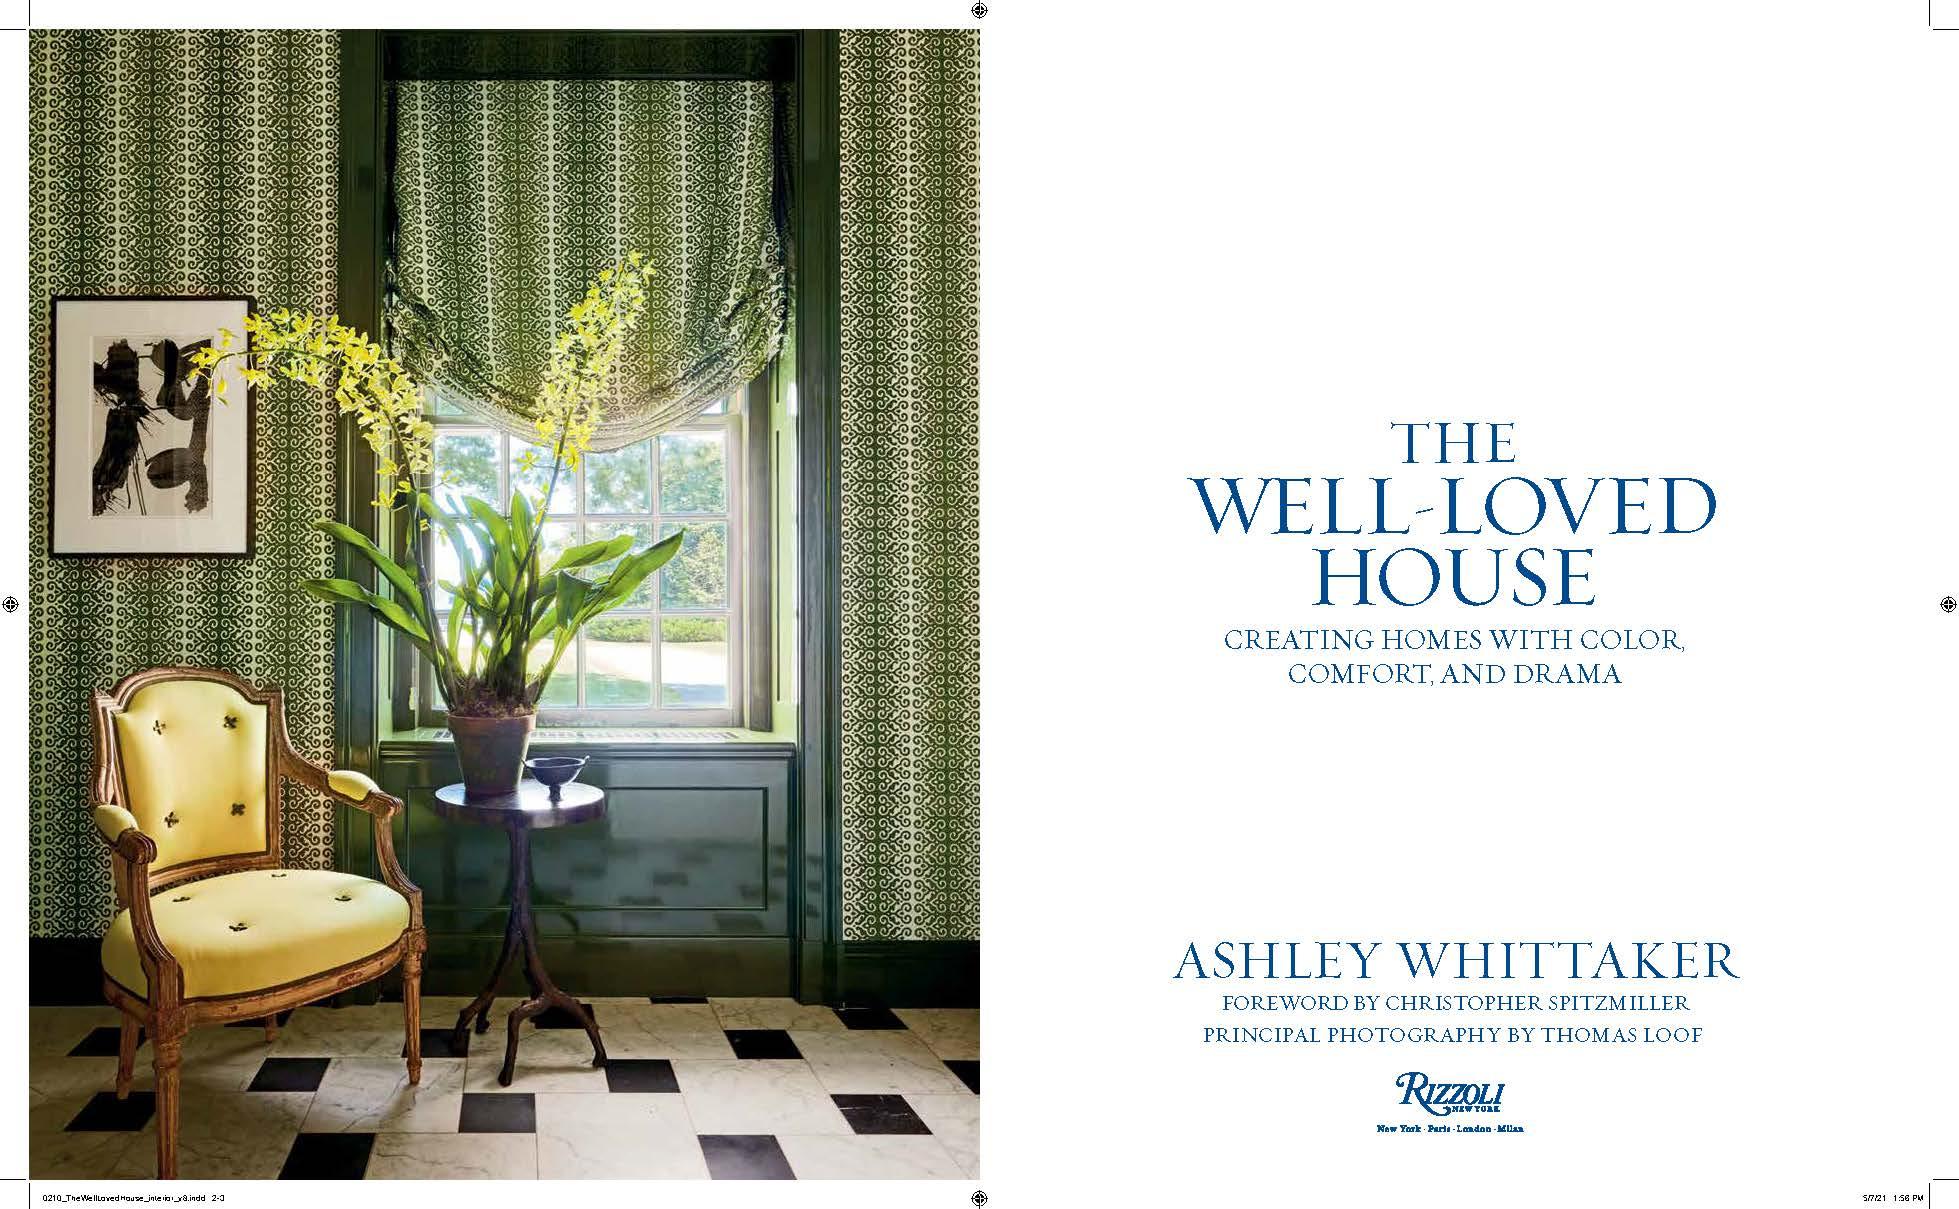 Author Ashley Whittaker, Foreword by Christopher Spitzmiller
In her first book, Elle Decor A-List decorator Ashley Whittaker shares the secrets of her colorful, pattern-filled classic rooms.

Ashley Whittaker’s work is distinctively classic and